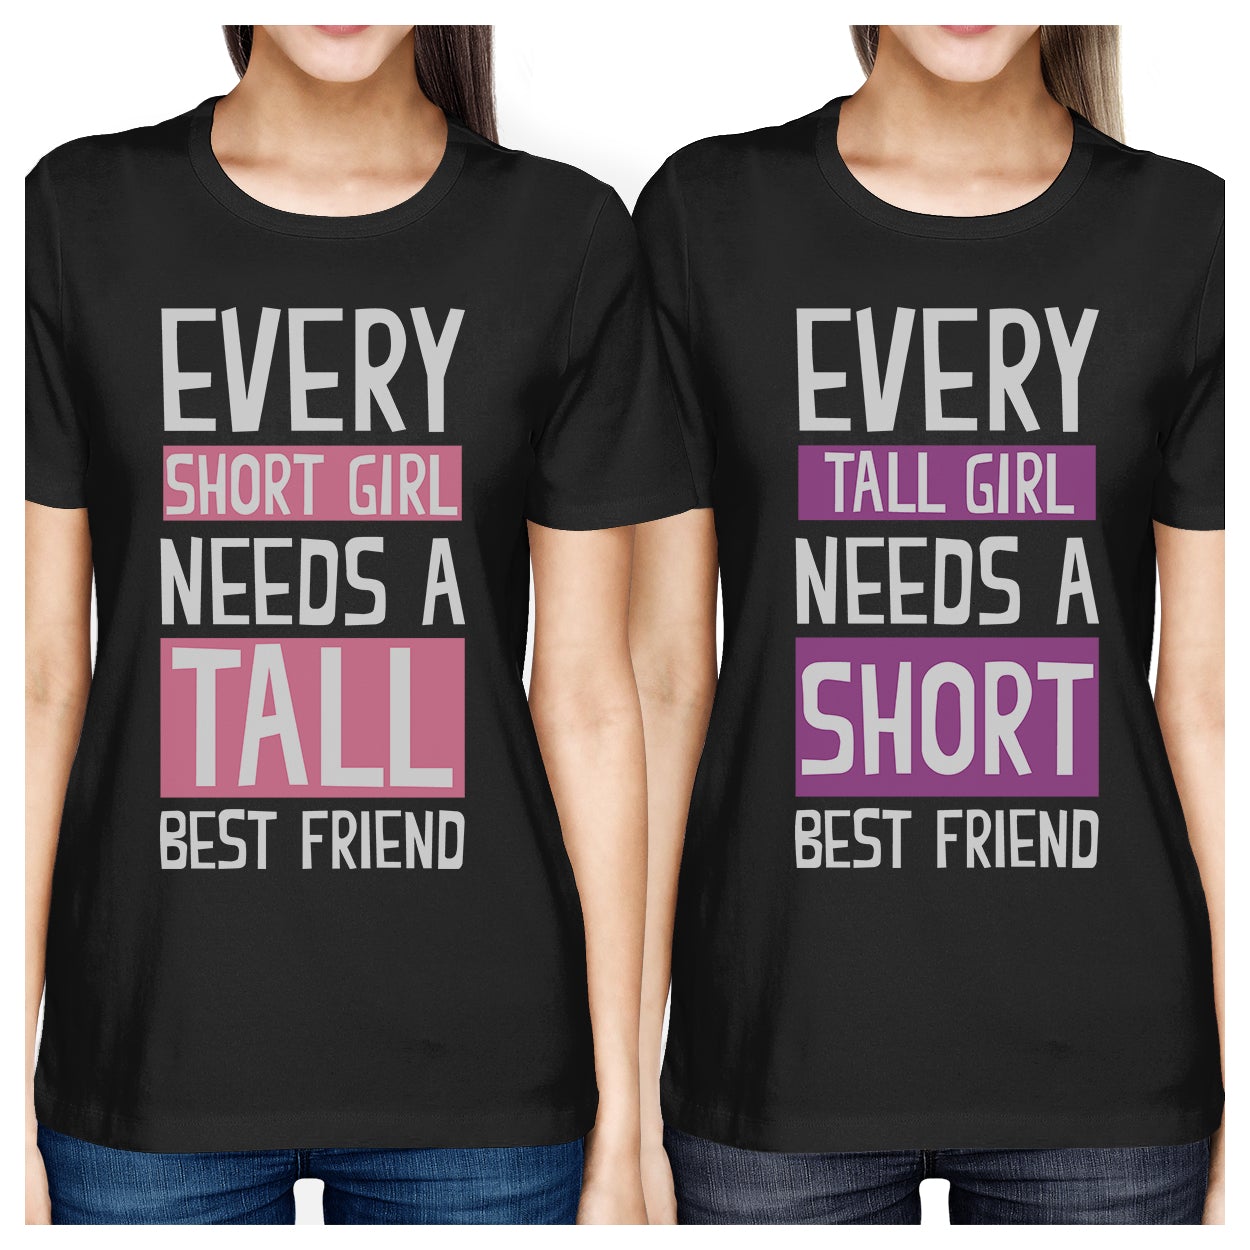 Best Friend Gift Best Friend Shirts for 3 Bff Shirts for 3 